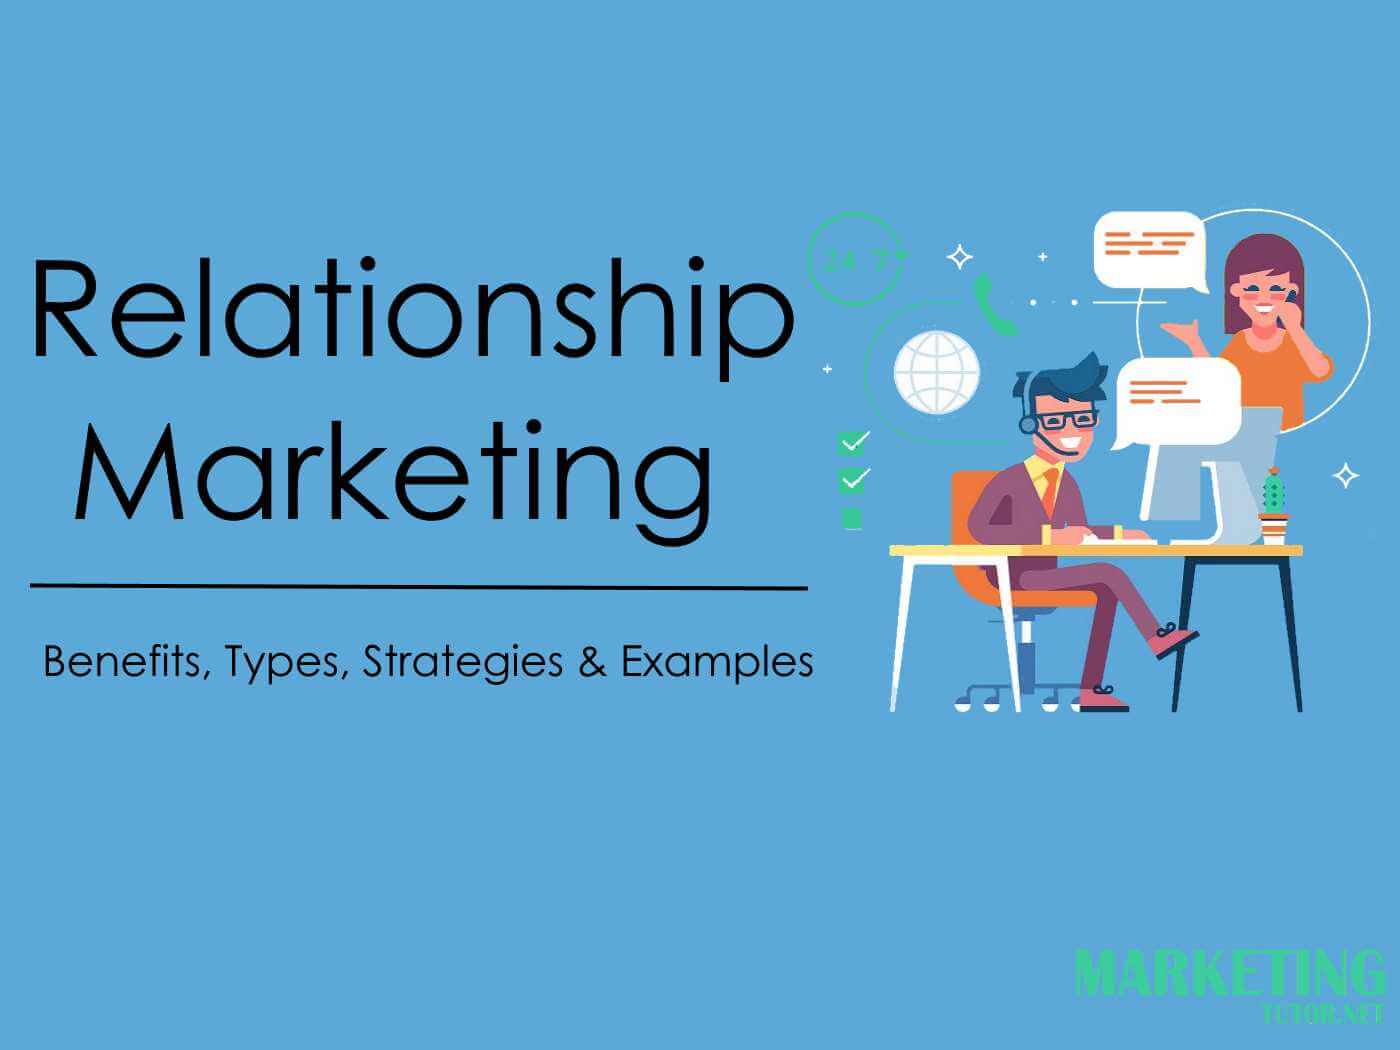 what are the benefits of relationship marketing